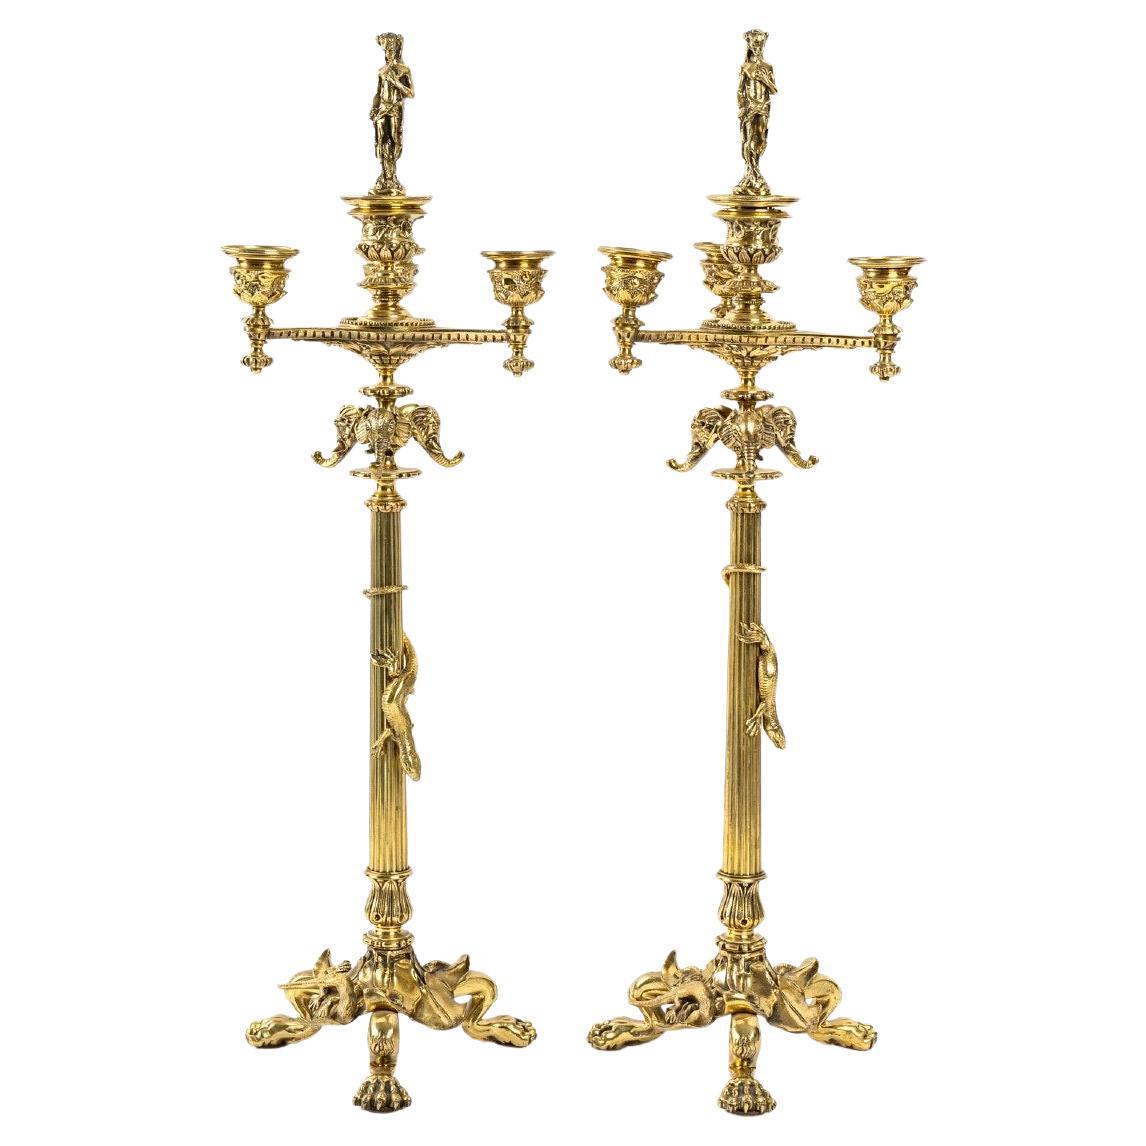 Pair of Gilt Bronze Candlesticks Attributed to F.Barbedienne Period 19th Century For Sale